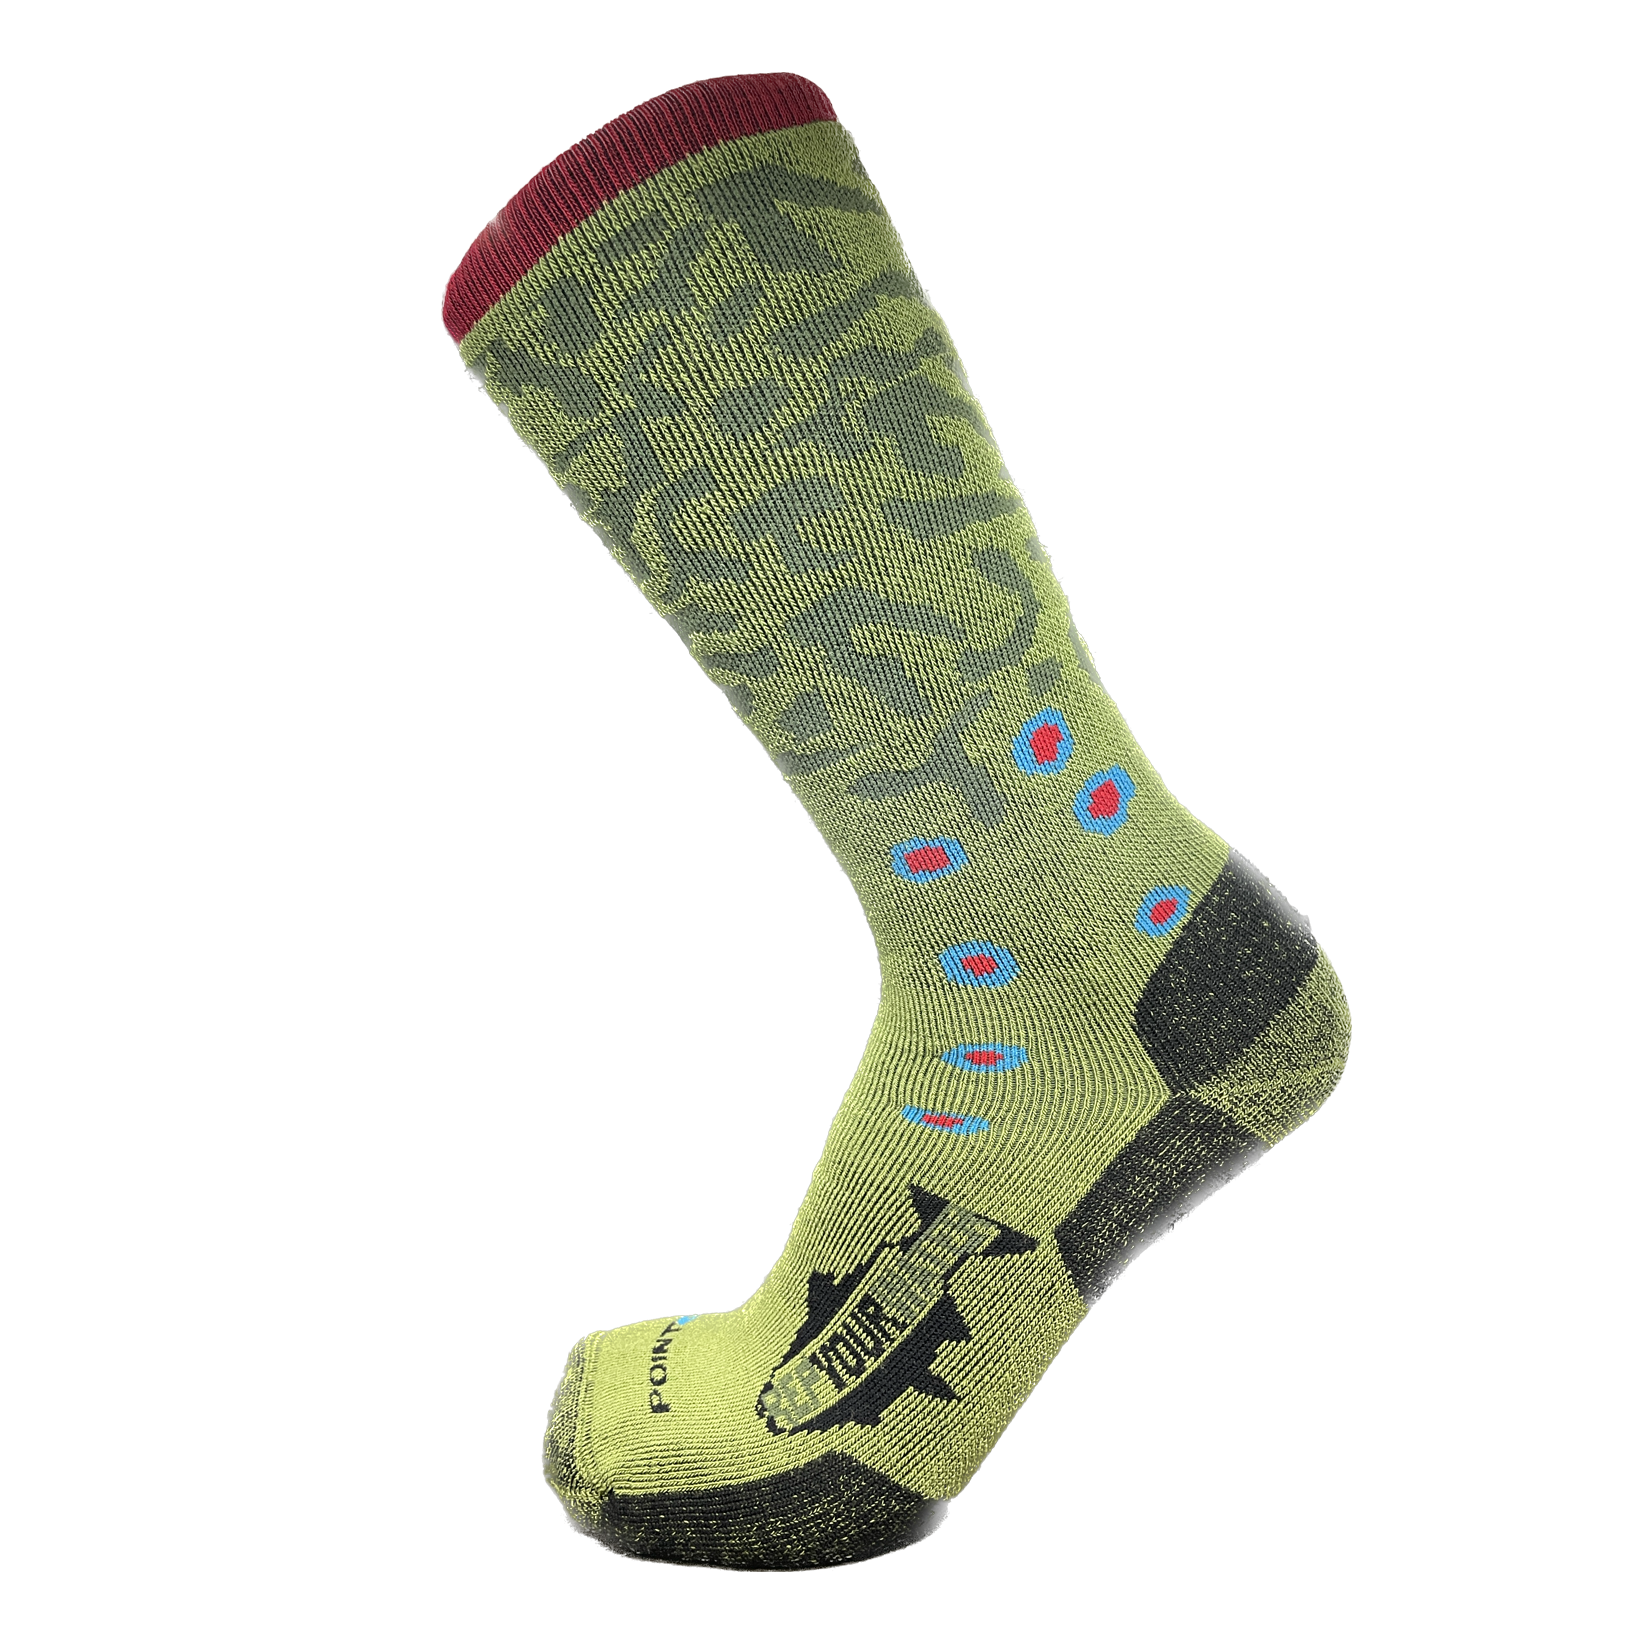 A sock with the pattern of a brook trout also has a logo on the foot that reads repyourwater in a trout silhouette